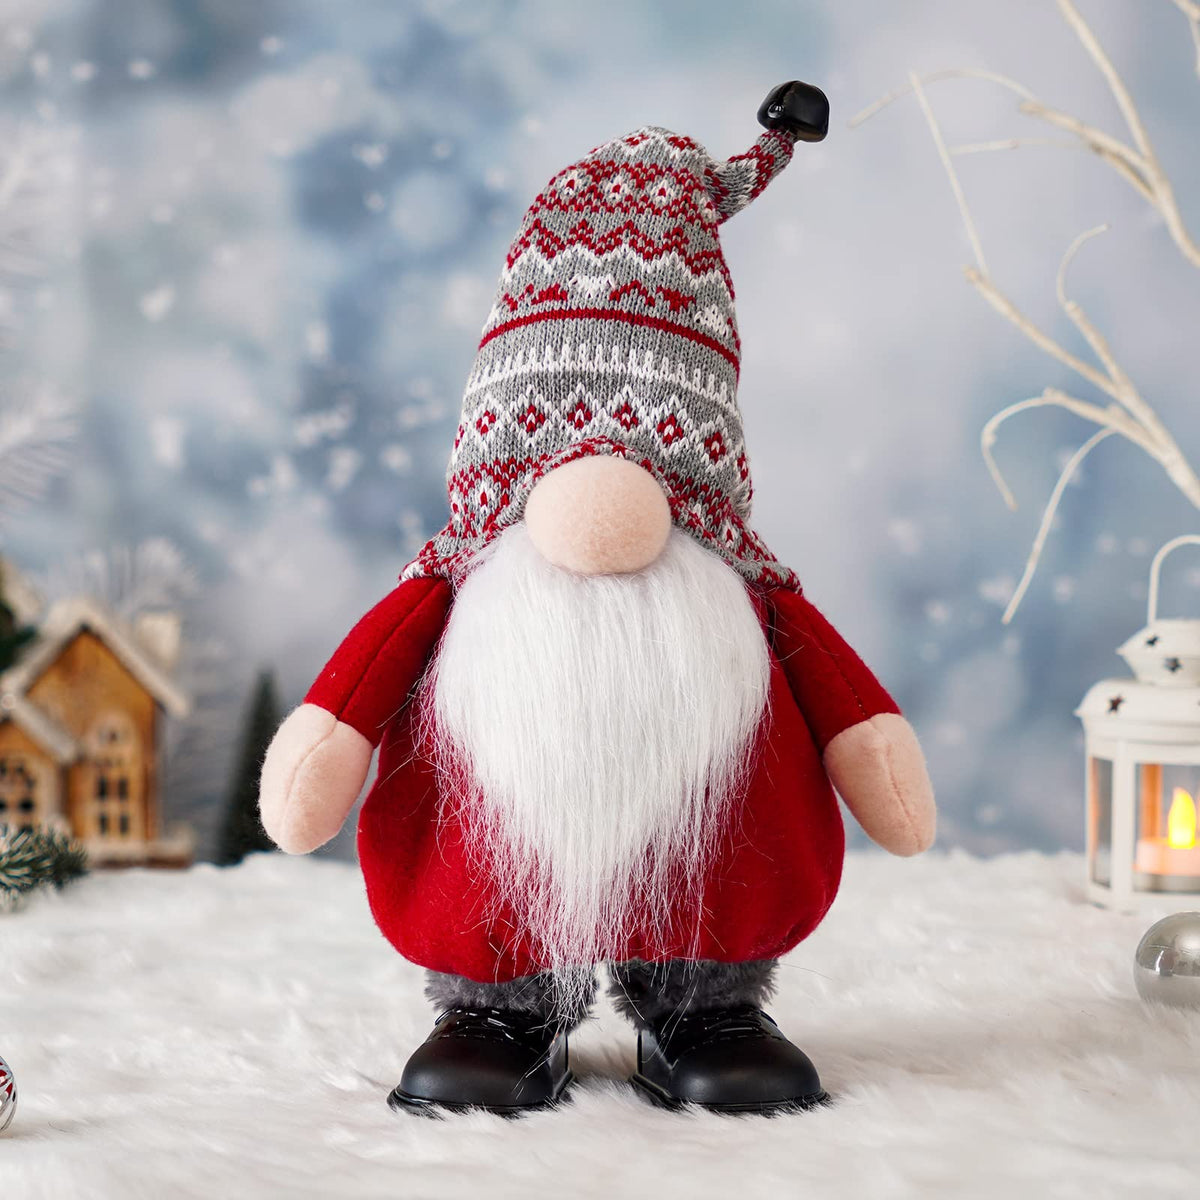 Hodao Christmas Gnomes Collection Figurines Decorations for Home